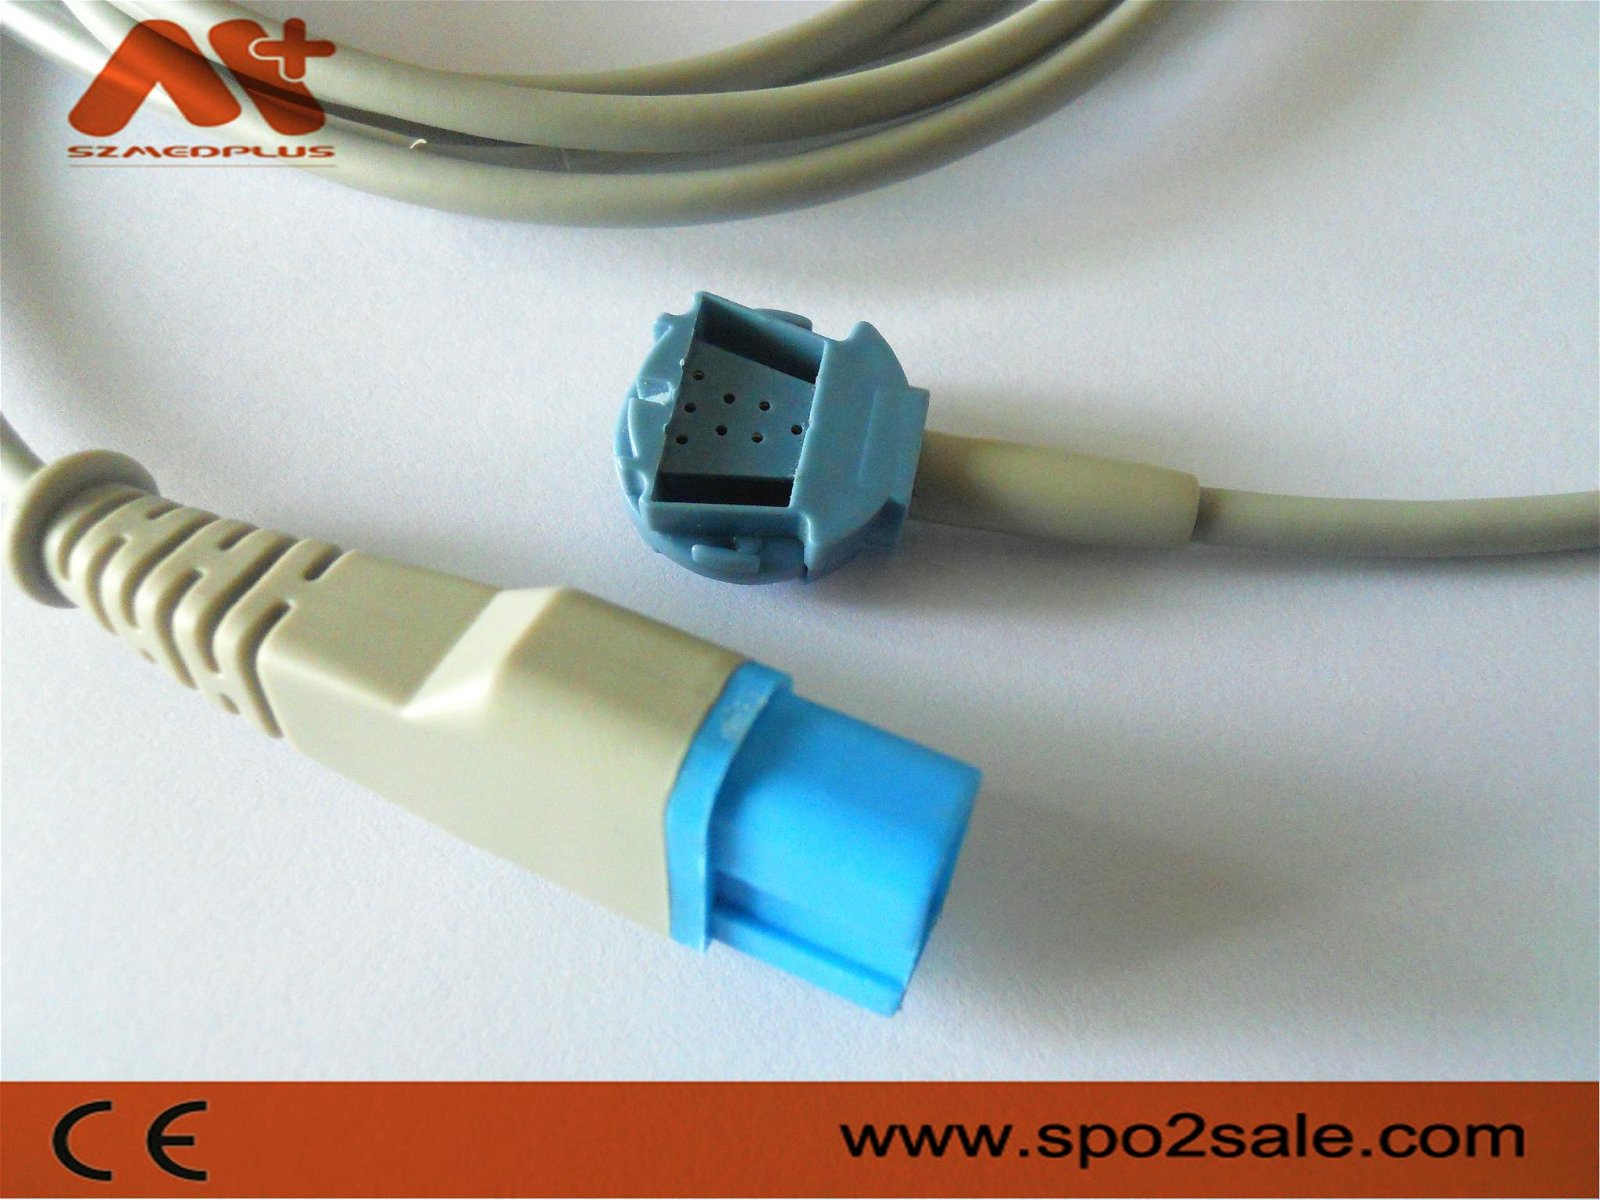 OEM Spo2 adapter cable to use OXY FUN Sensor with Spacelabs 2400 monitor